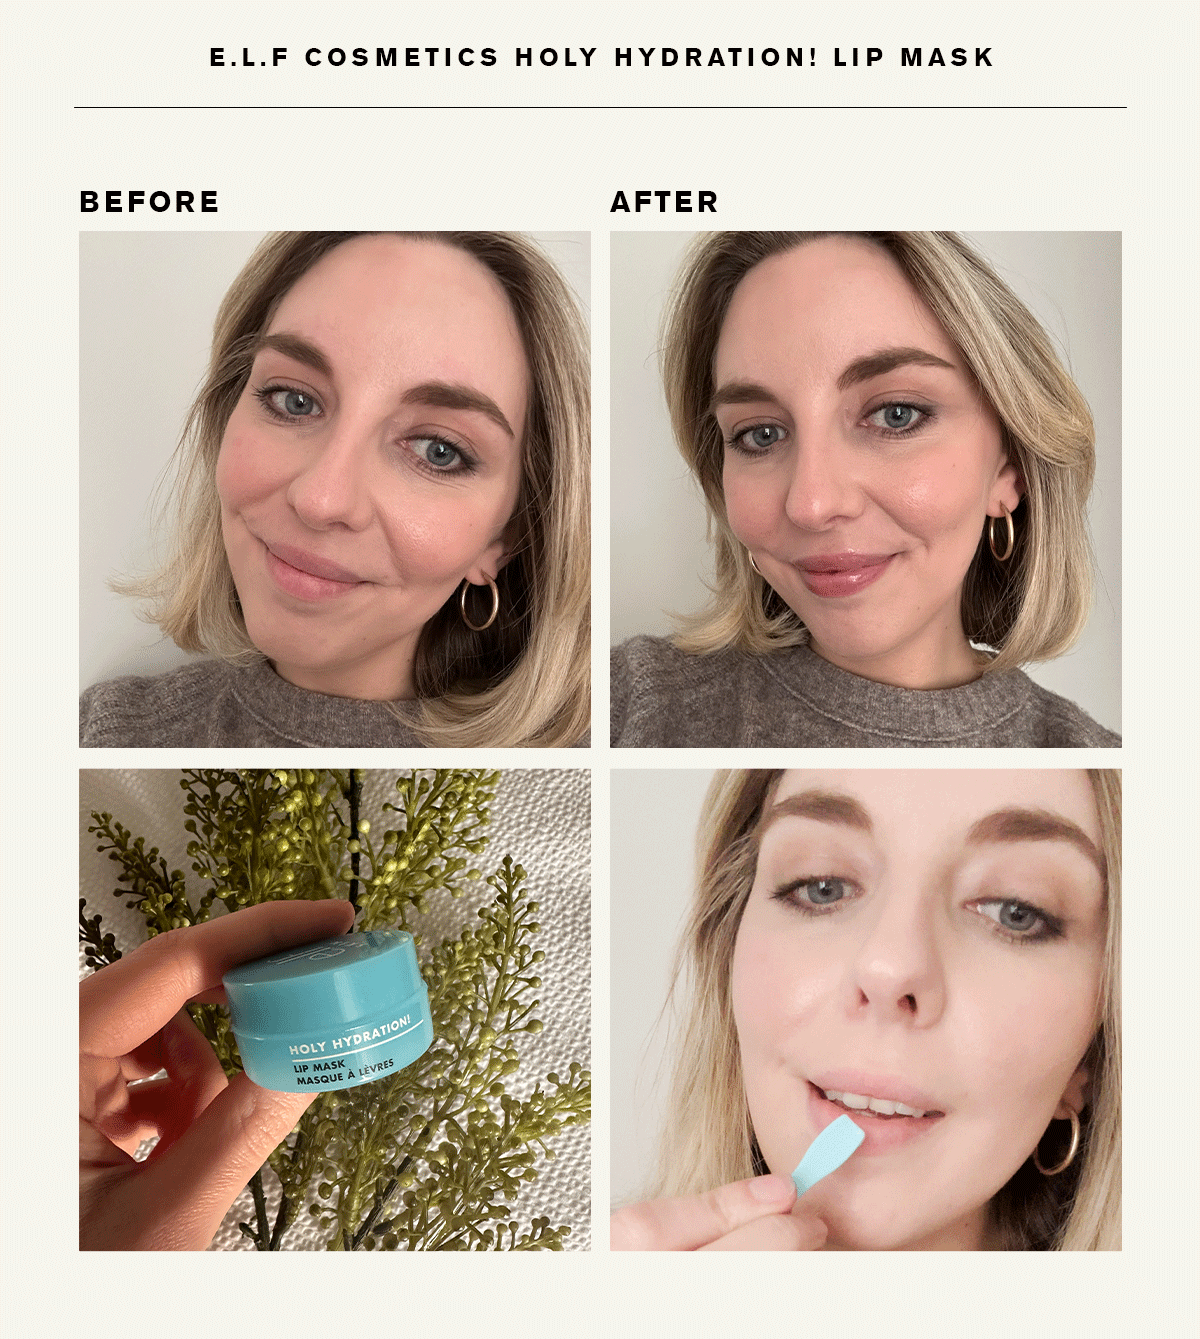 elf holy hydration lip mask review